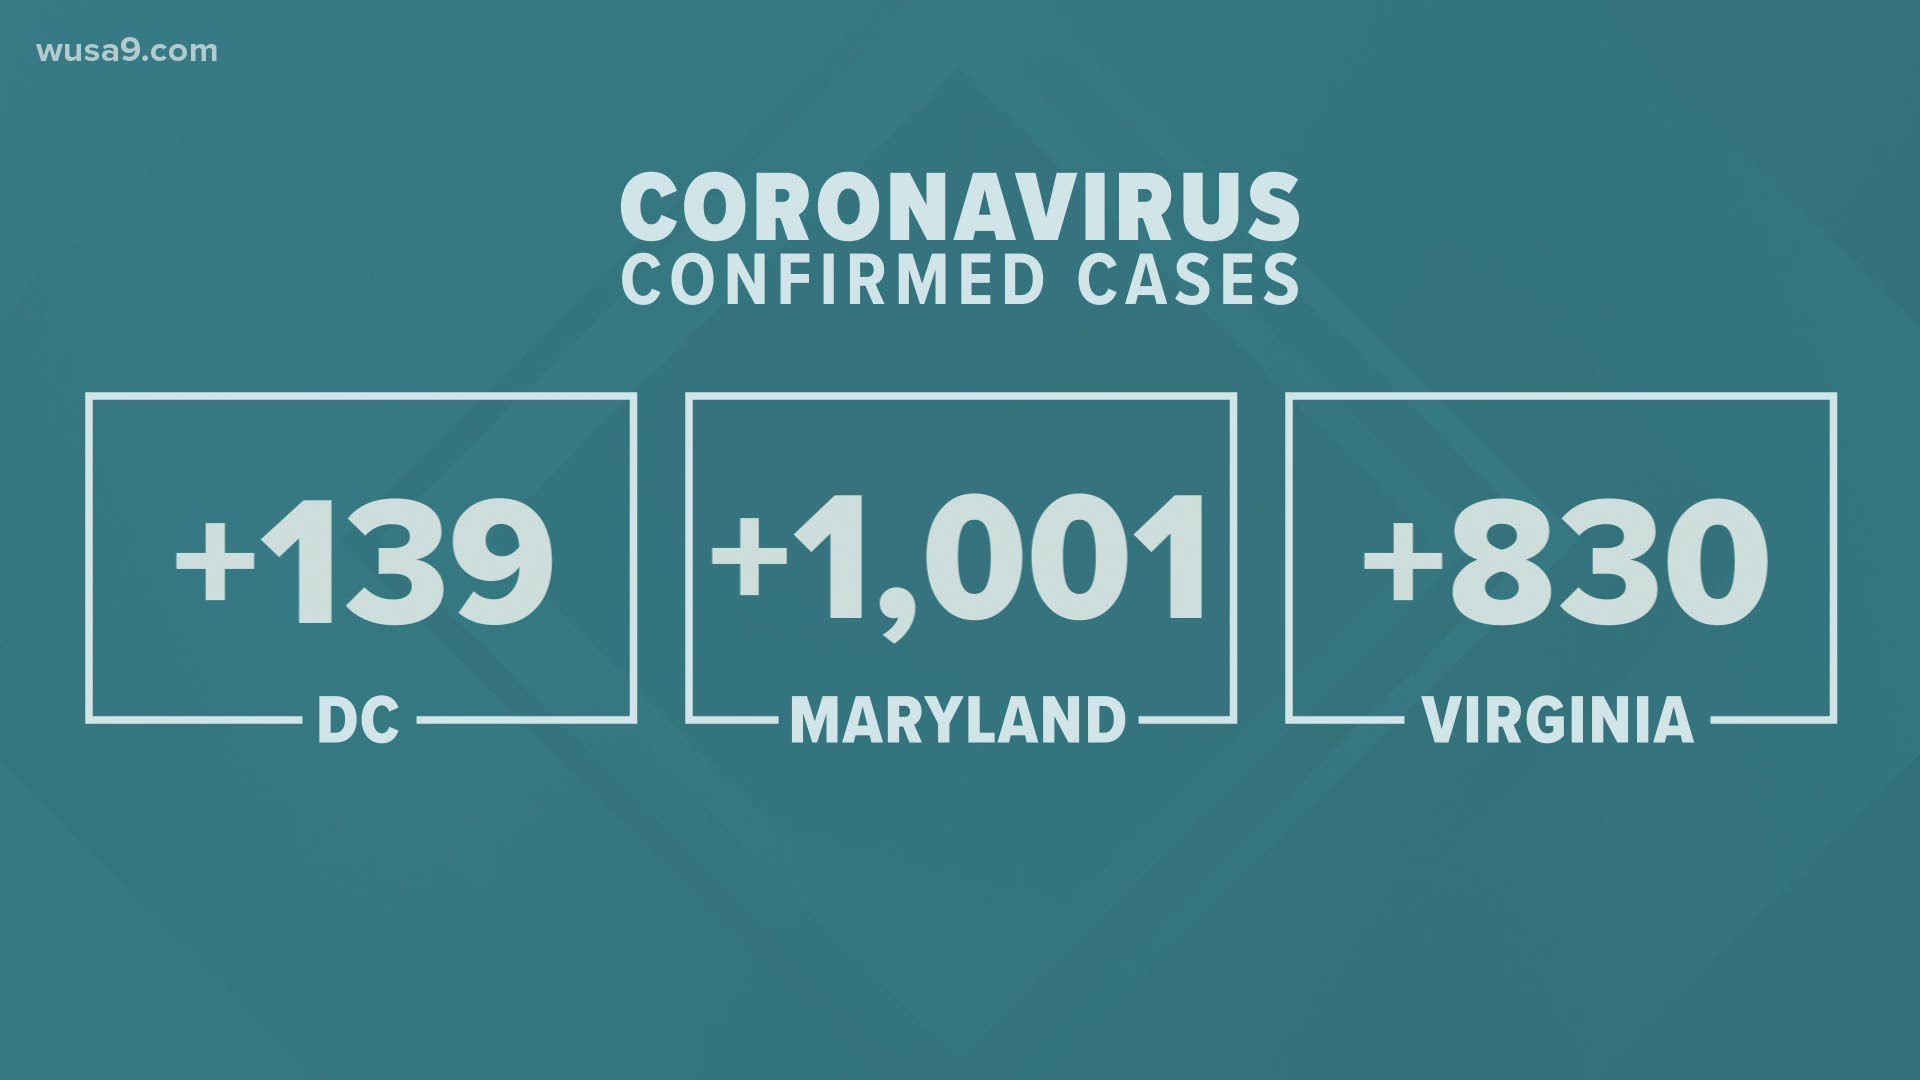 Here is a look at the latest information on how the coronavirus is impacting D.C., Maryland and Virginia.